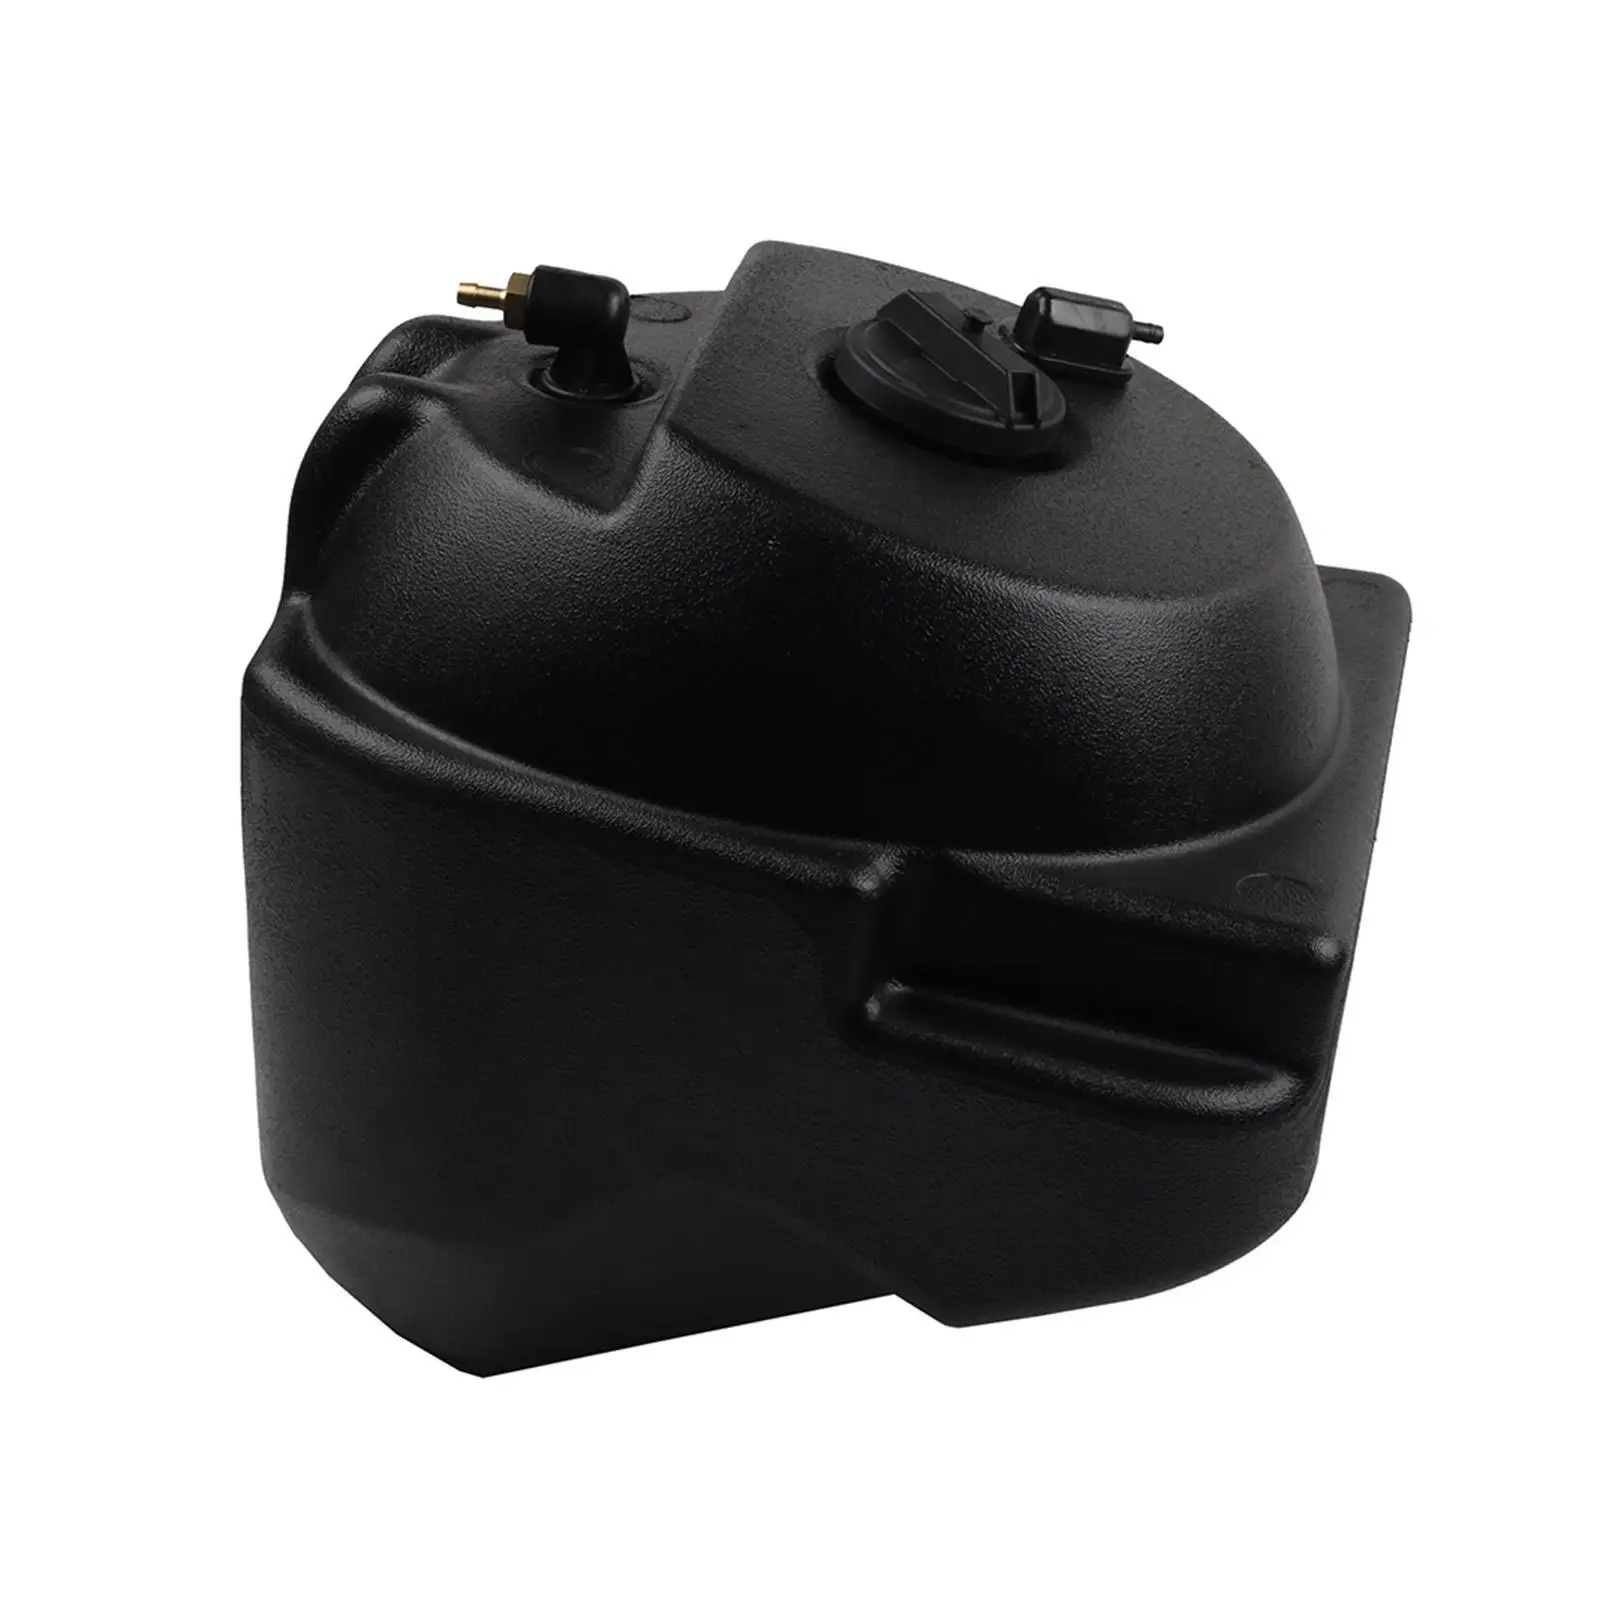 Black Auxiliary Fuel Tank Motorcycle Parts Professional Repair Parts Oil Tank Fuel Tank Oil Box for Yamaha Xmax300 Xmax250